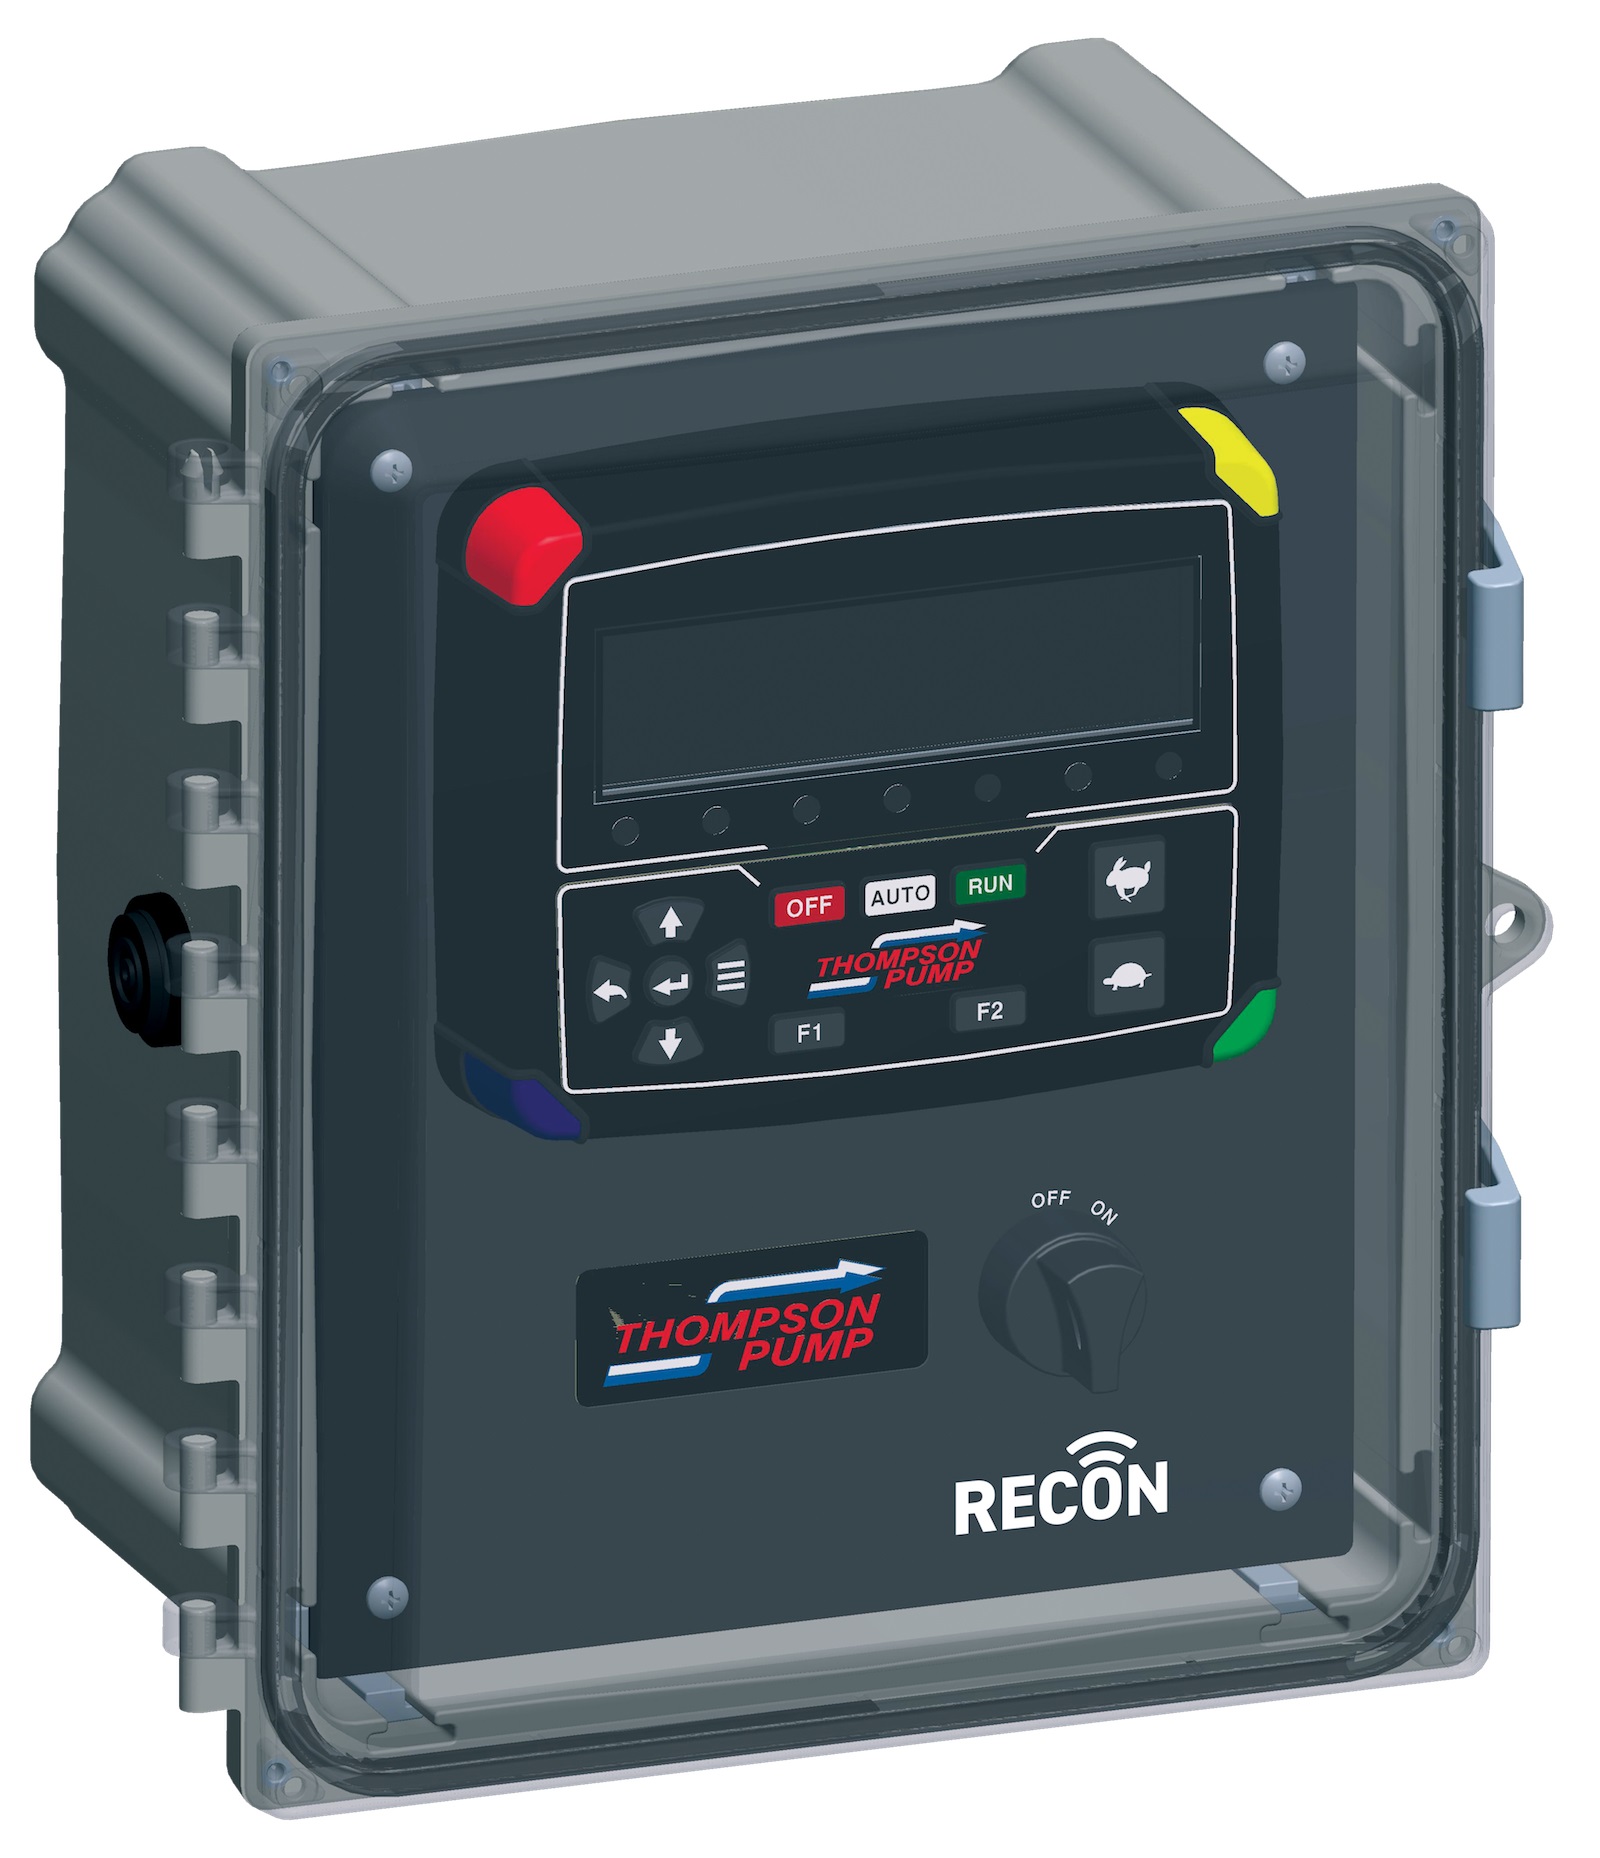 If there’s a problem with the pump or engine, the RECON2000T can even be set up to notify you on your smart device.